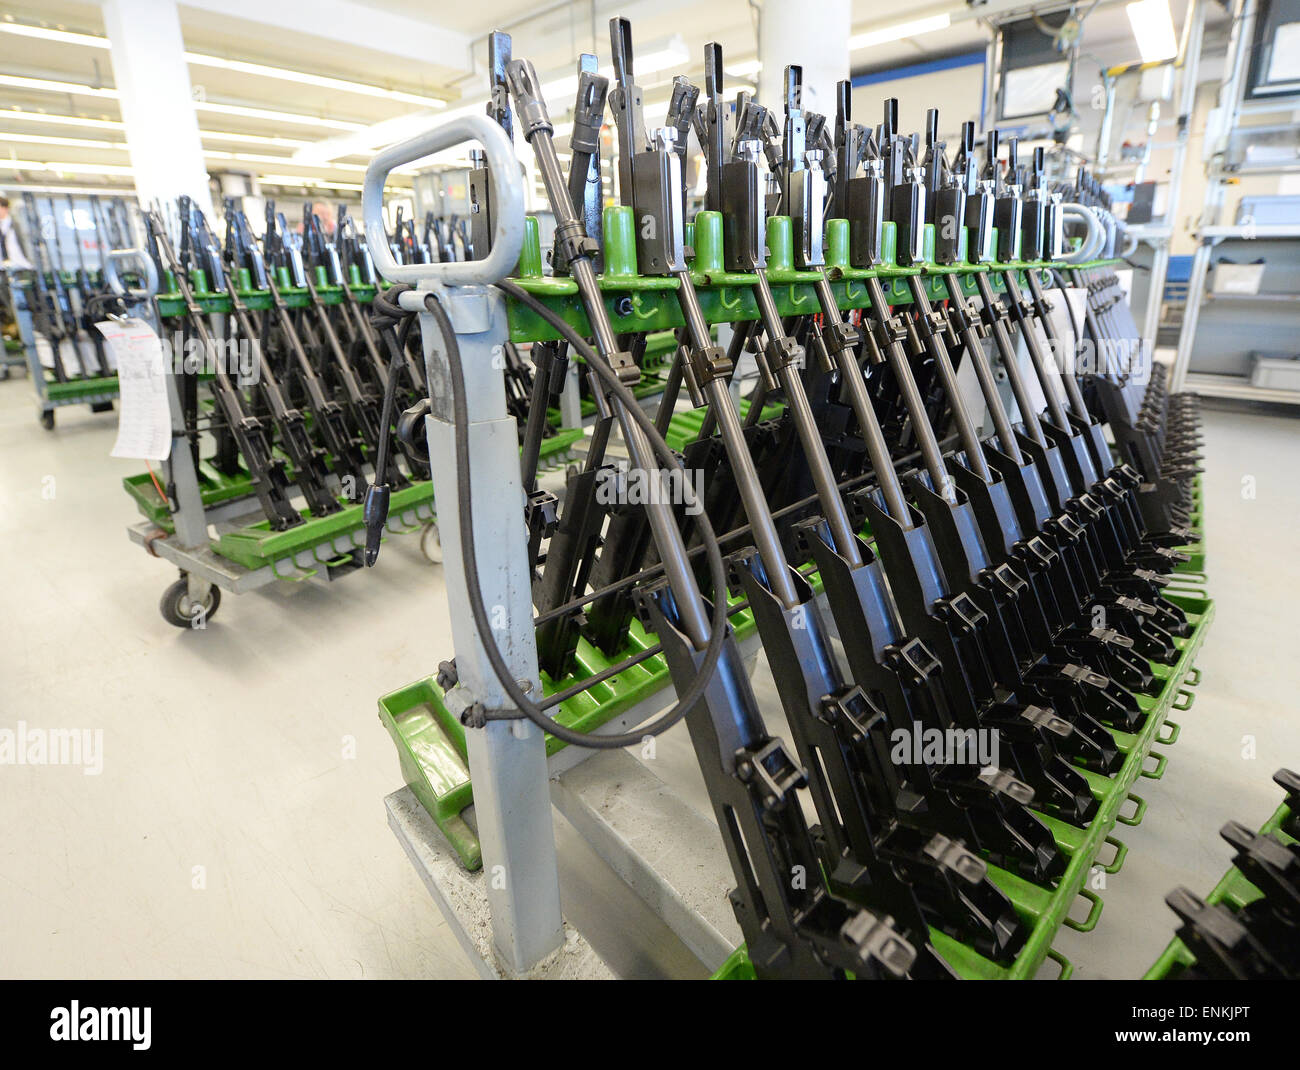 Oberndorf, Germany. 07th May, 2015. Heckler & Koch G36 assault rifles have been lined up for maintenance at the headquarters of the weapons manufacturer in Oberndorf, Germany, 07 May 2015. The ongoing controversy surrounding the G36 assault rifle does not pose any threat to the company, Heckler & Koch said. Photo: Bernd Weissbrod/dpa/Alamy Live News Stock Photo